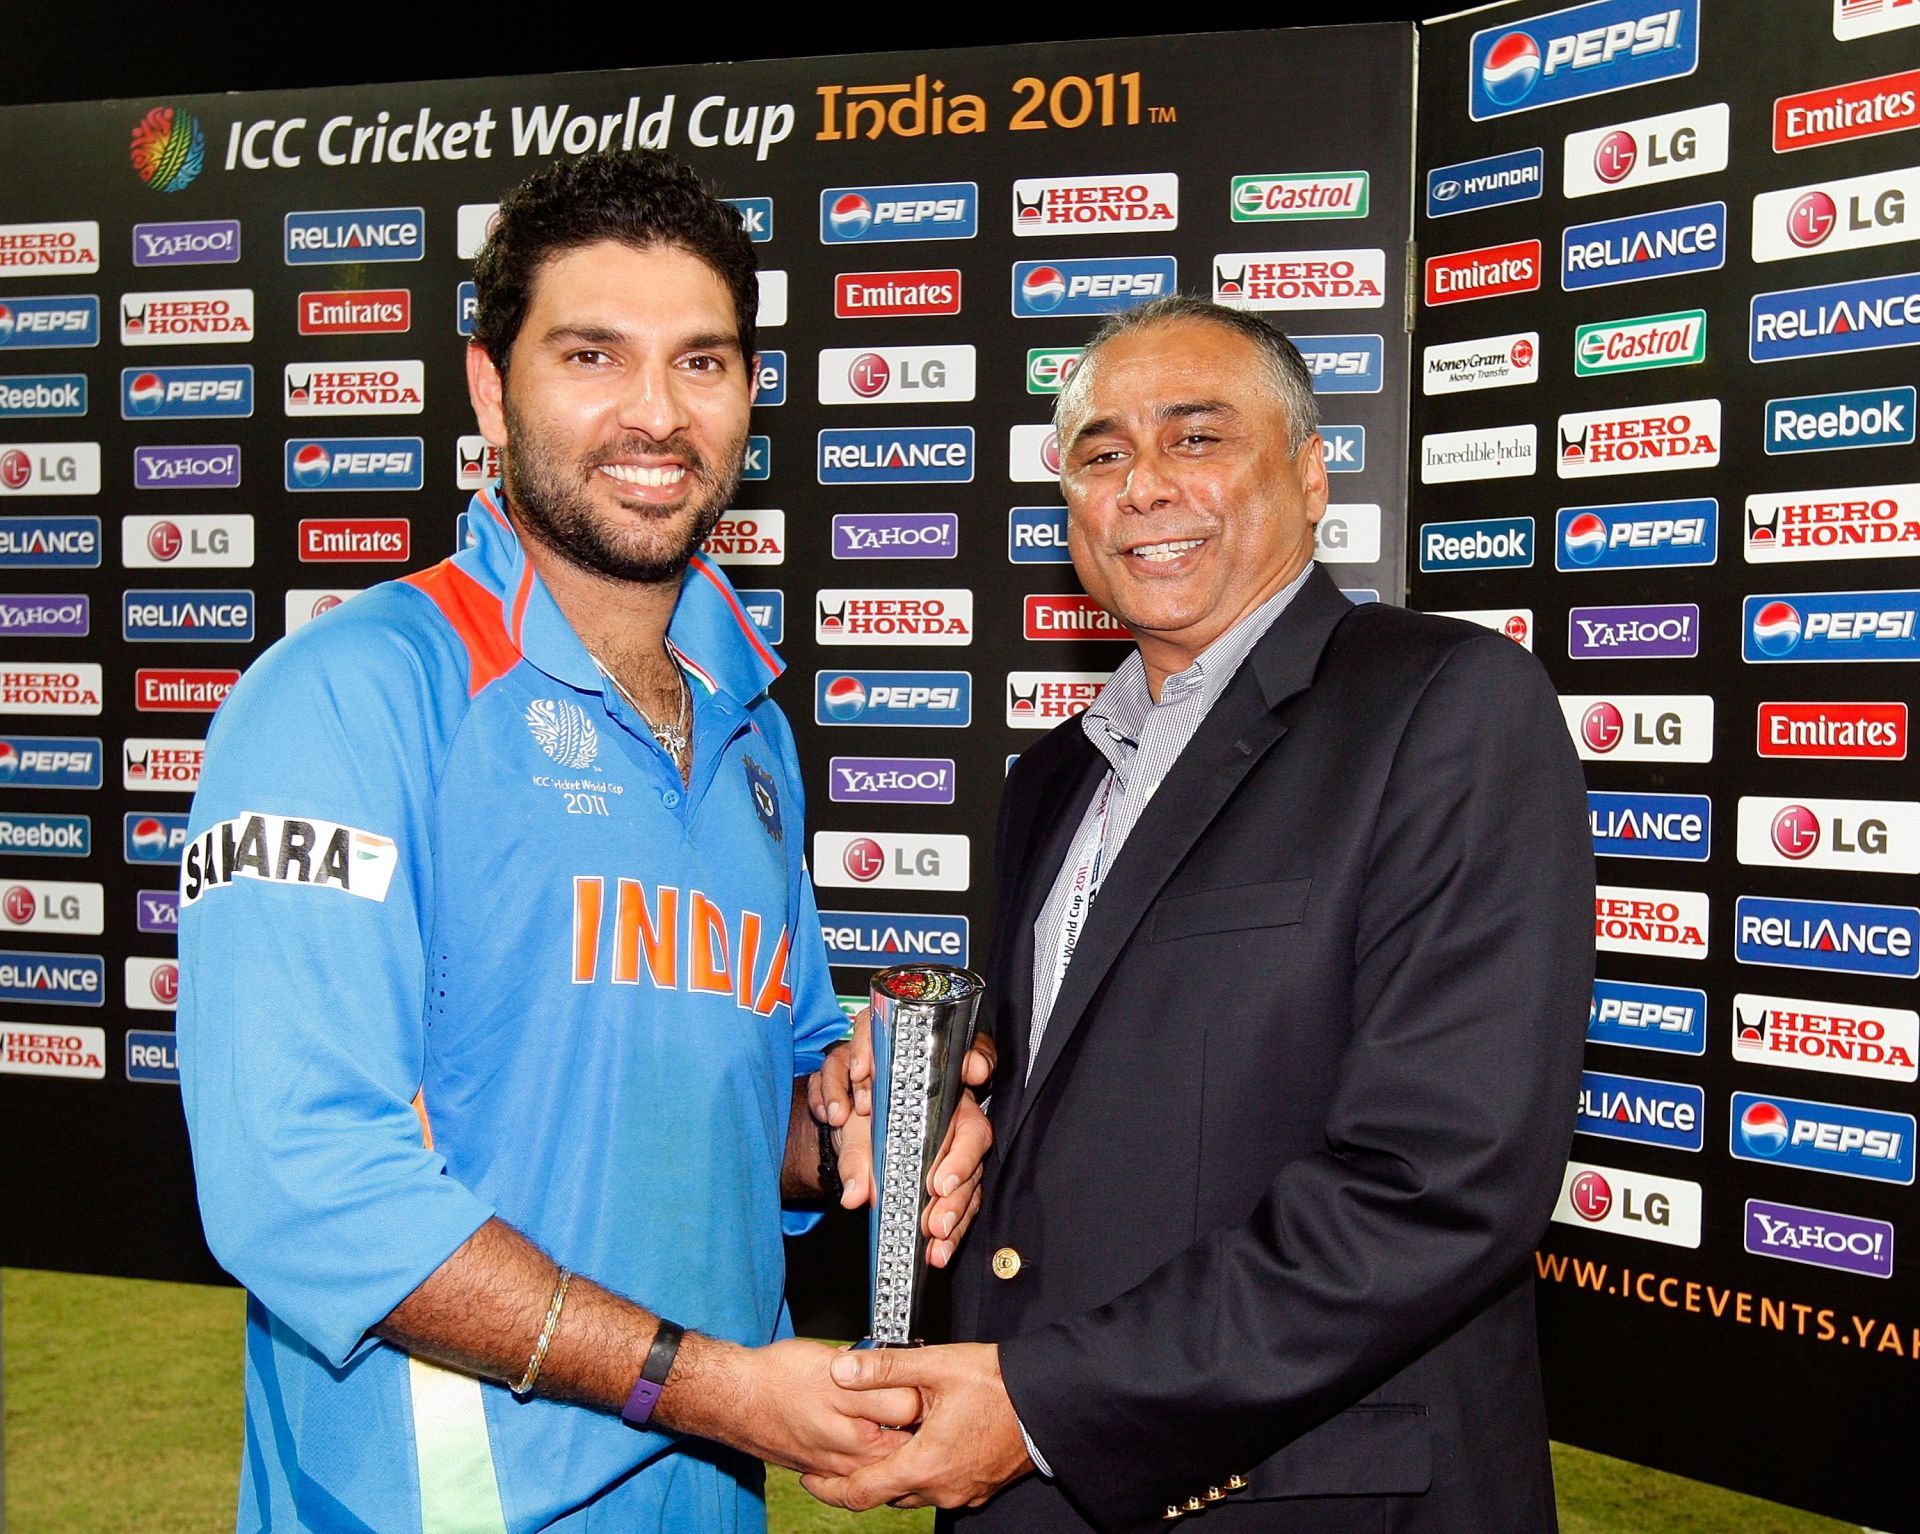 Yuvraj Singh - the man for the World Cups [Getty Images]